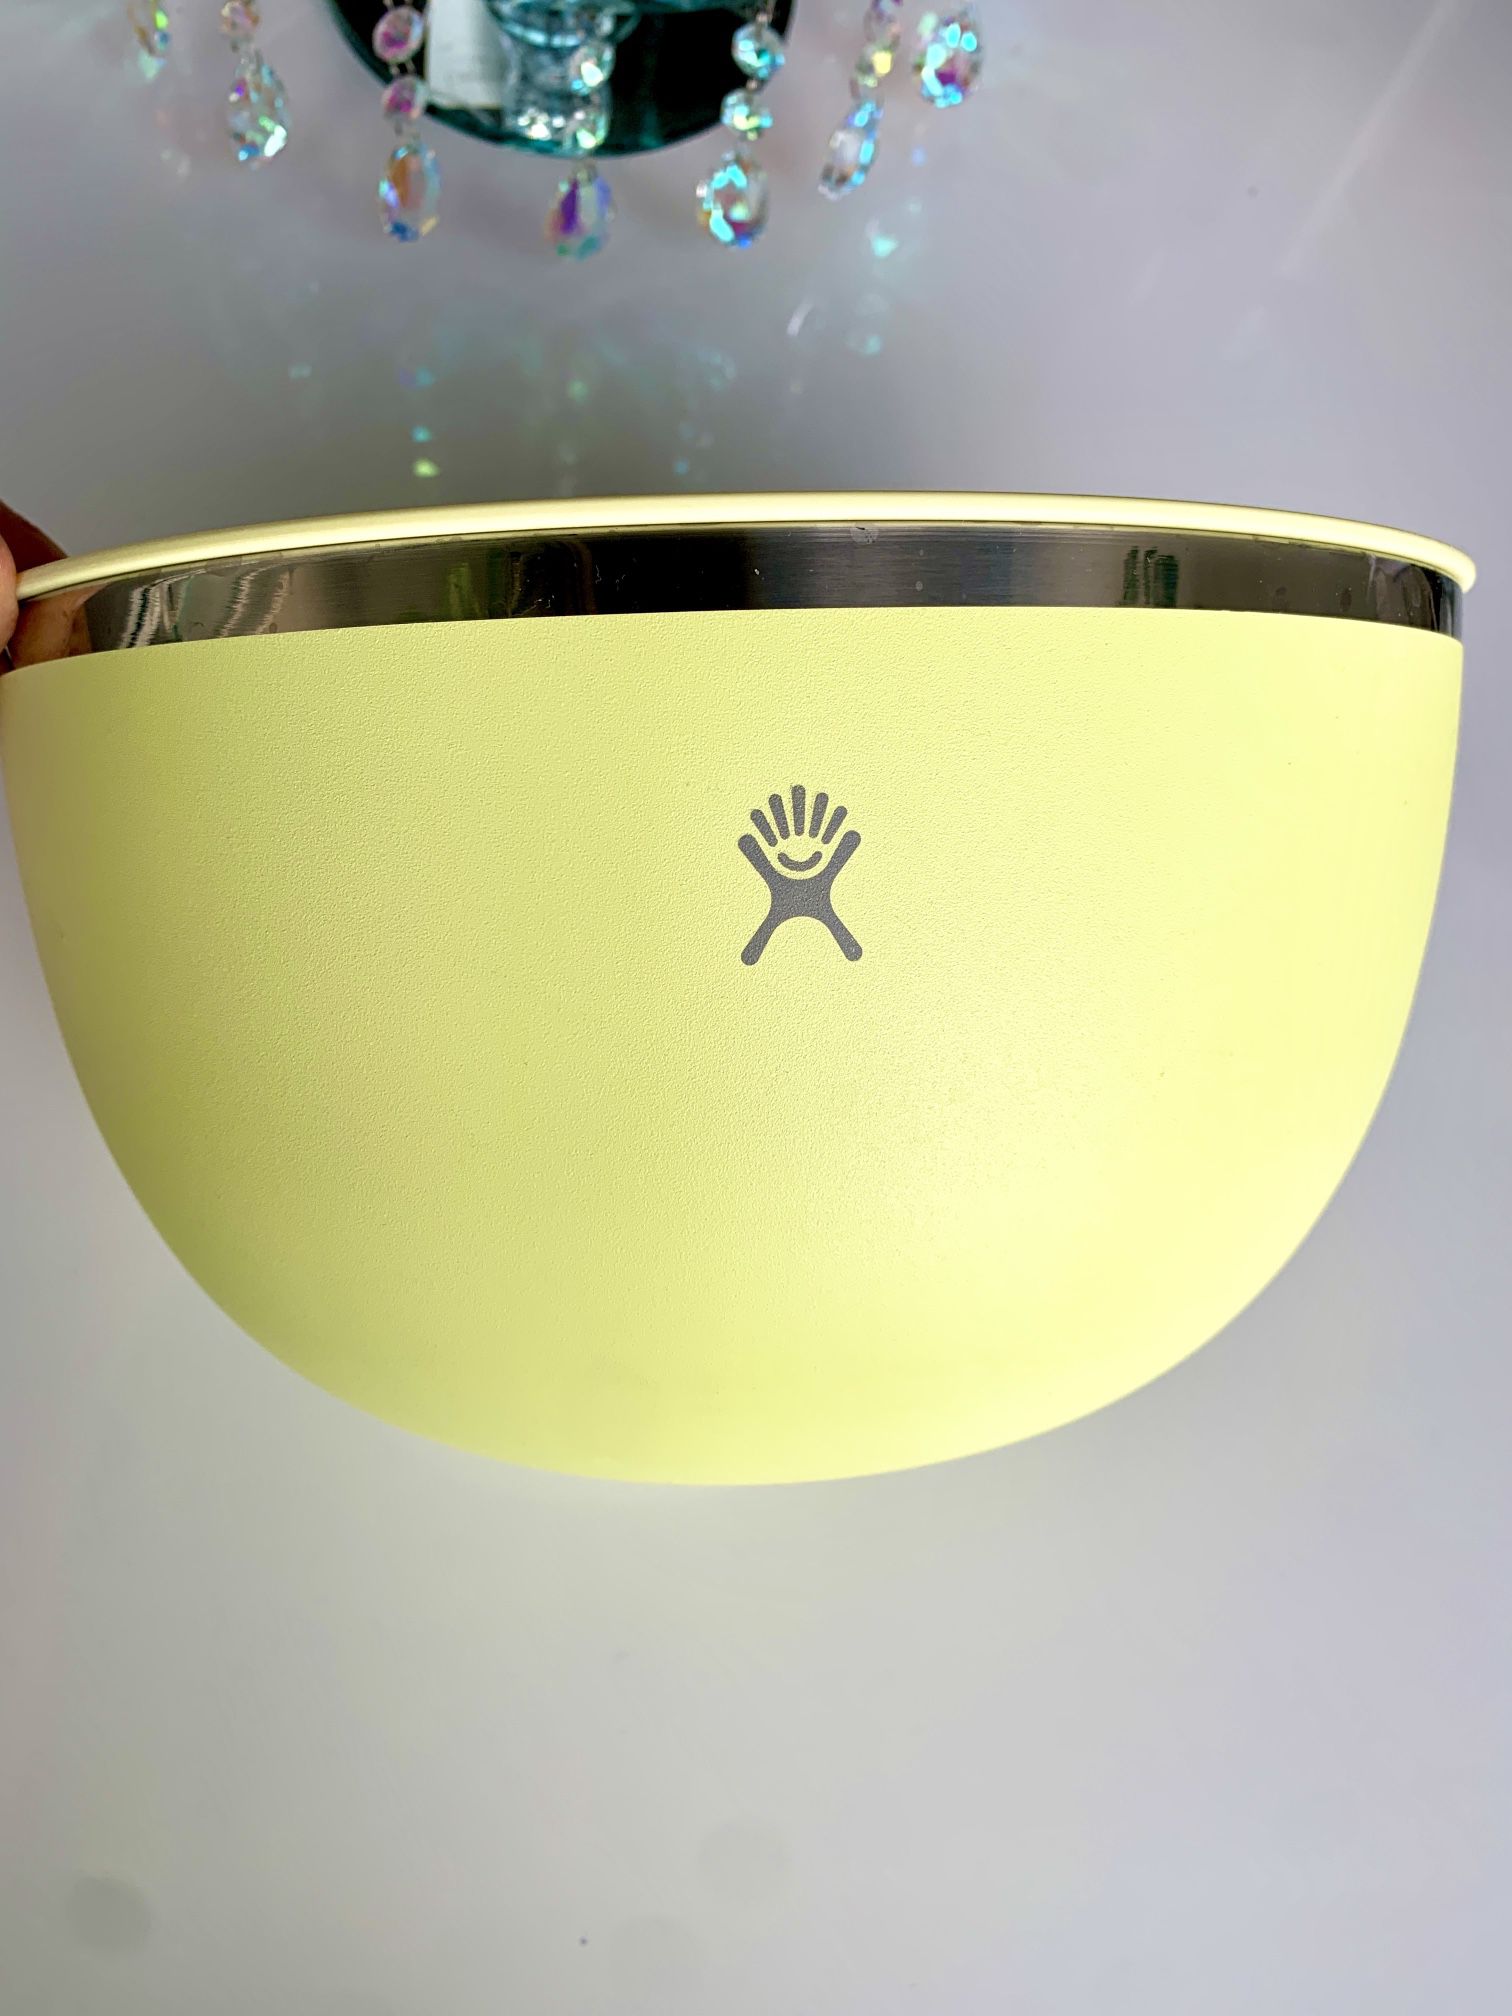 5Q Hydro Flask Outdoor Kitchen Bowl - Stainless Steel Pineapple yellow color